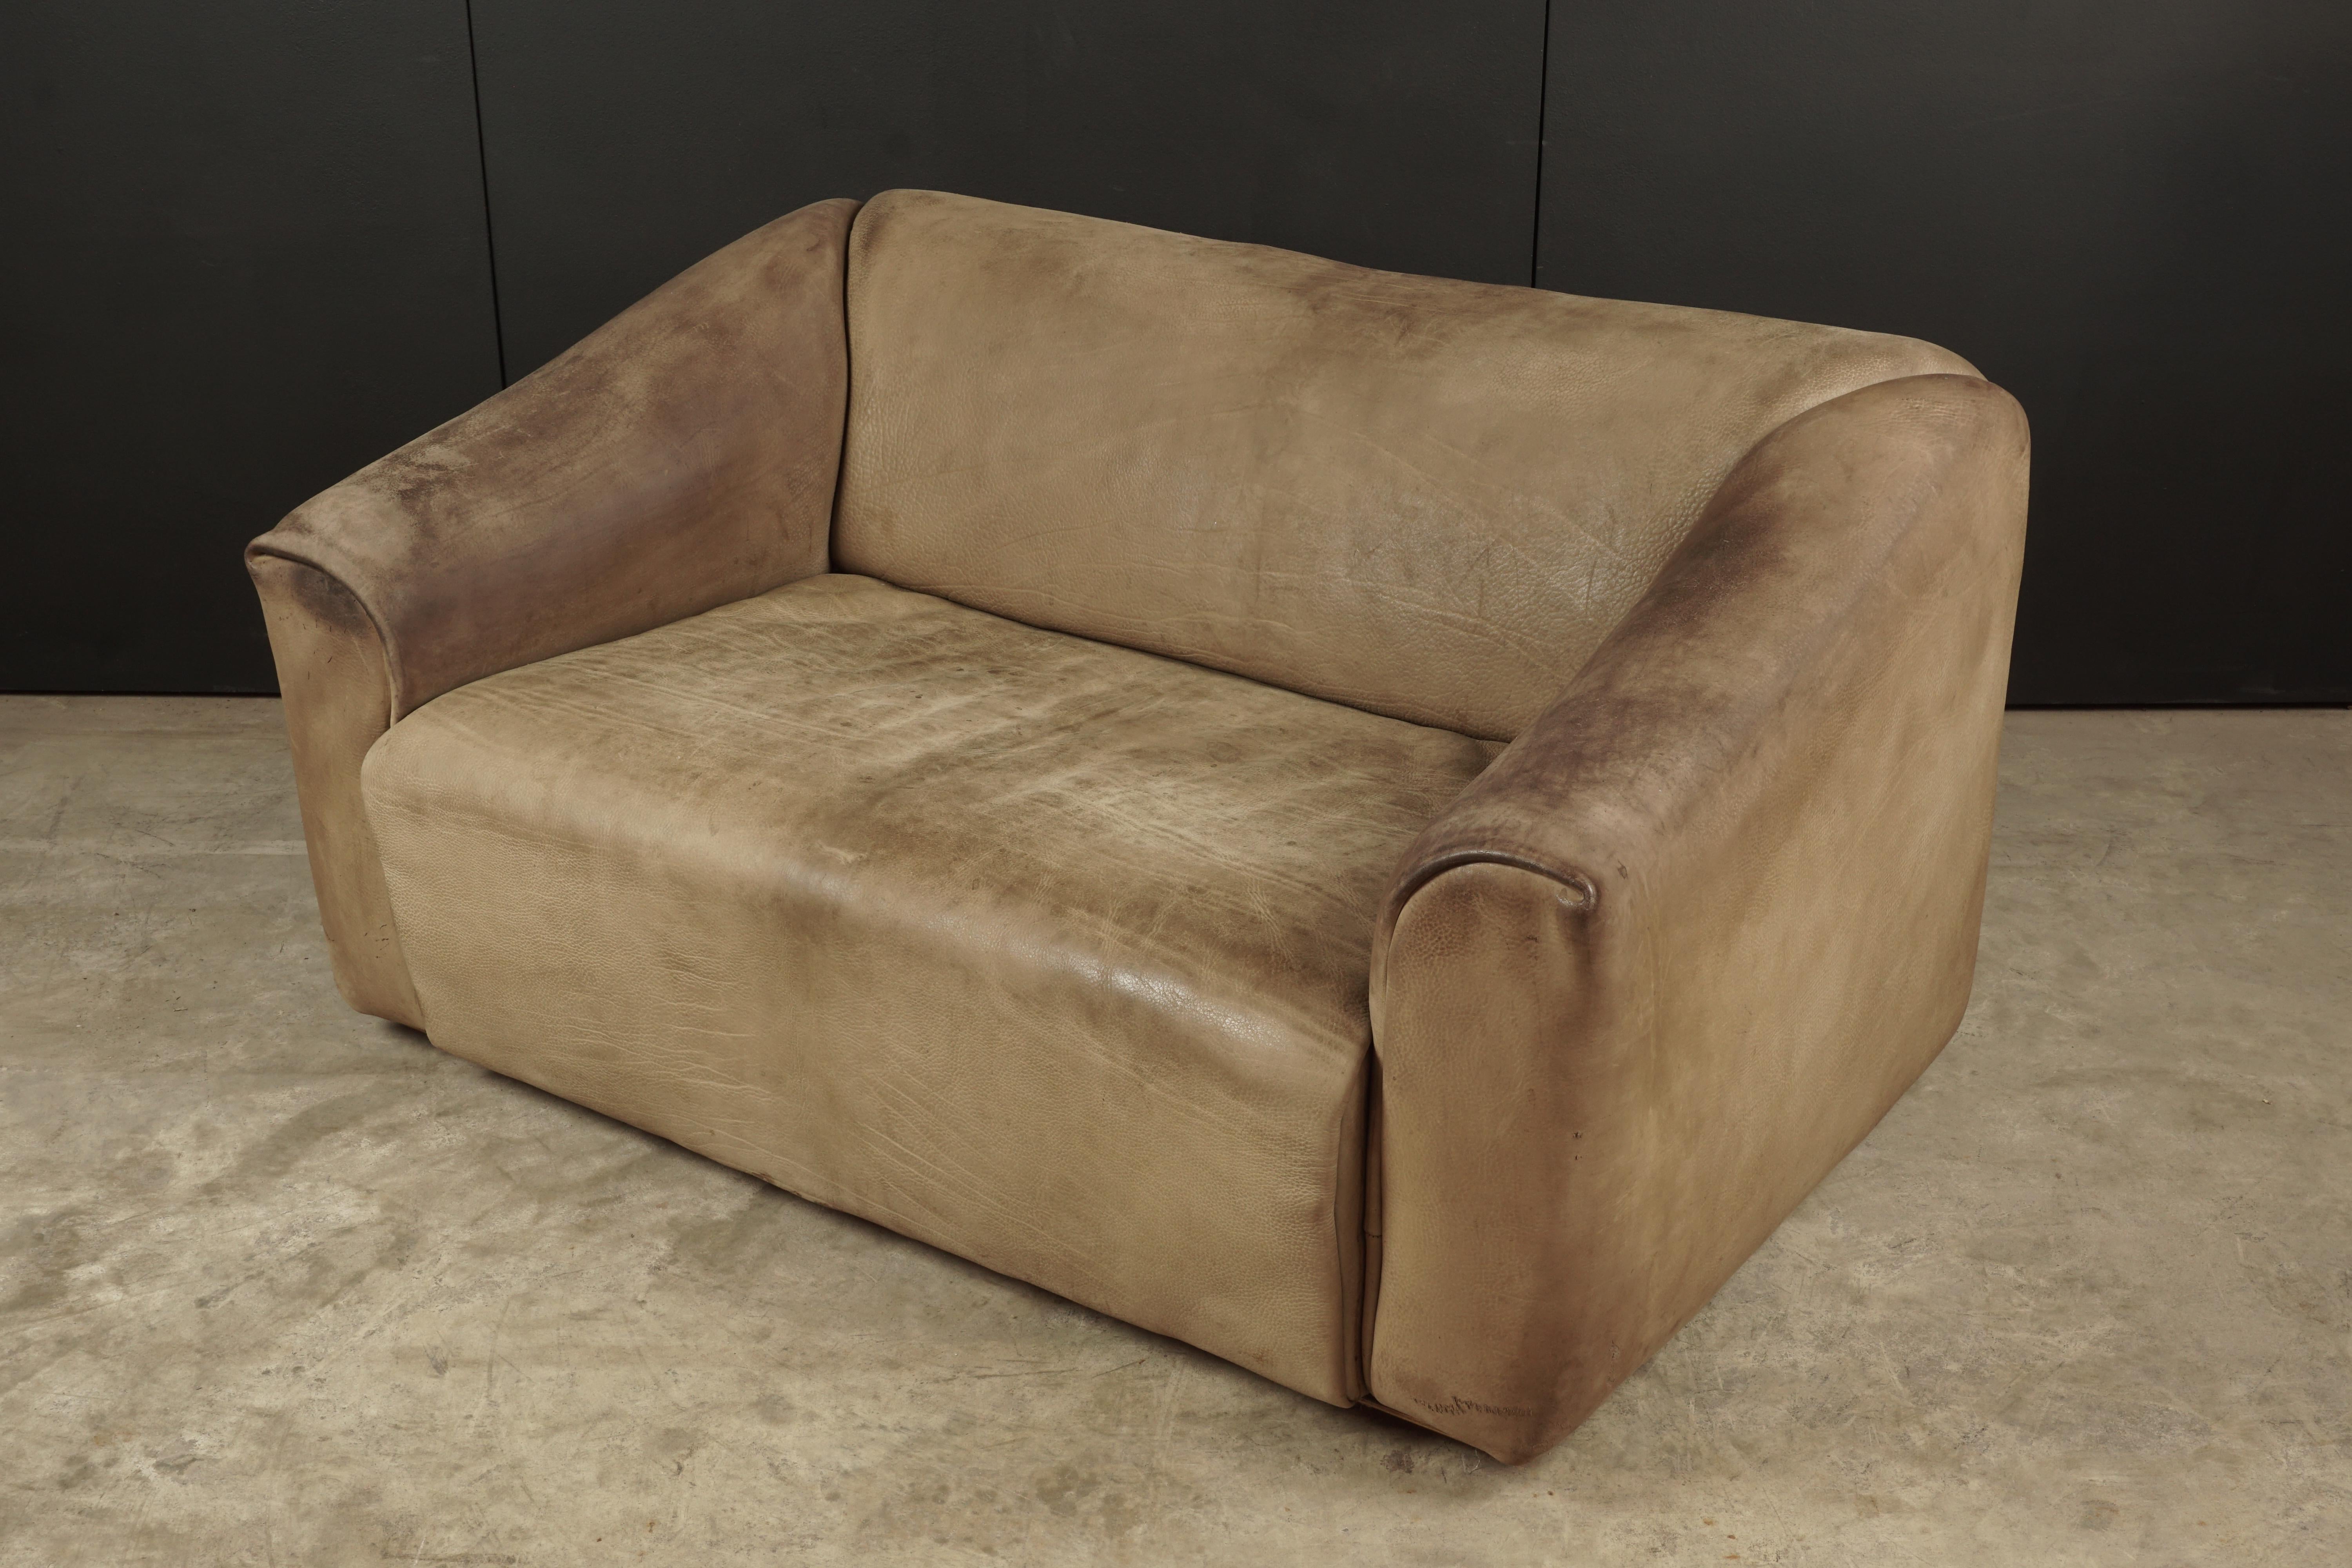 Leather two-seat sofa manufactured by De Sede, Switzerland. Original thick buffalo leather upholstery. Seat extends about 5-6